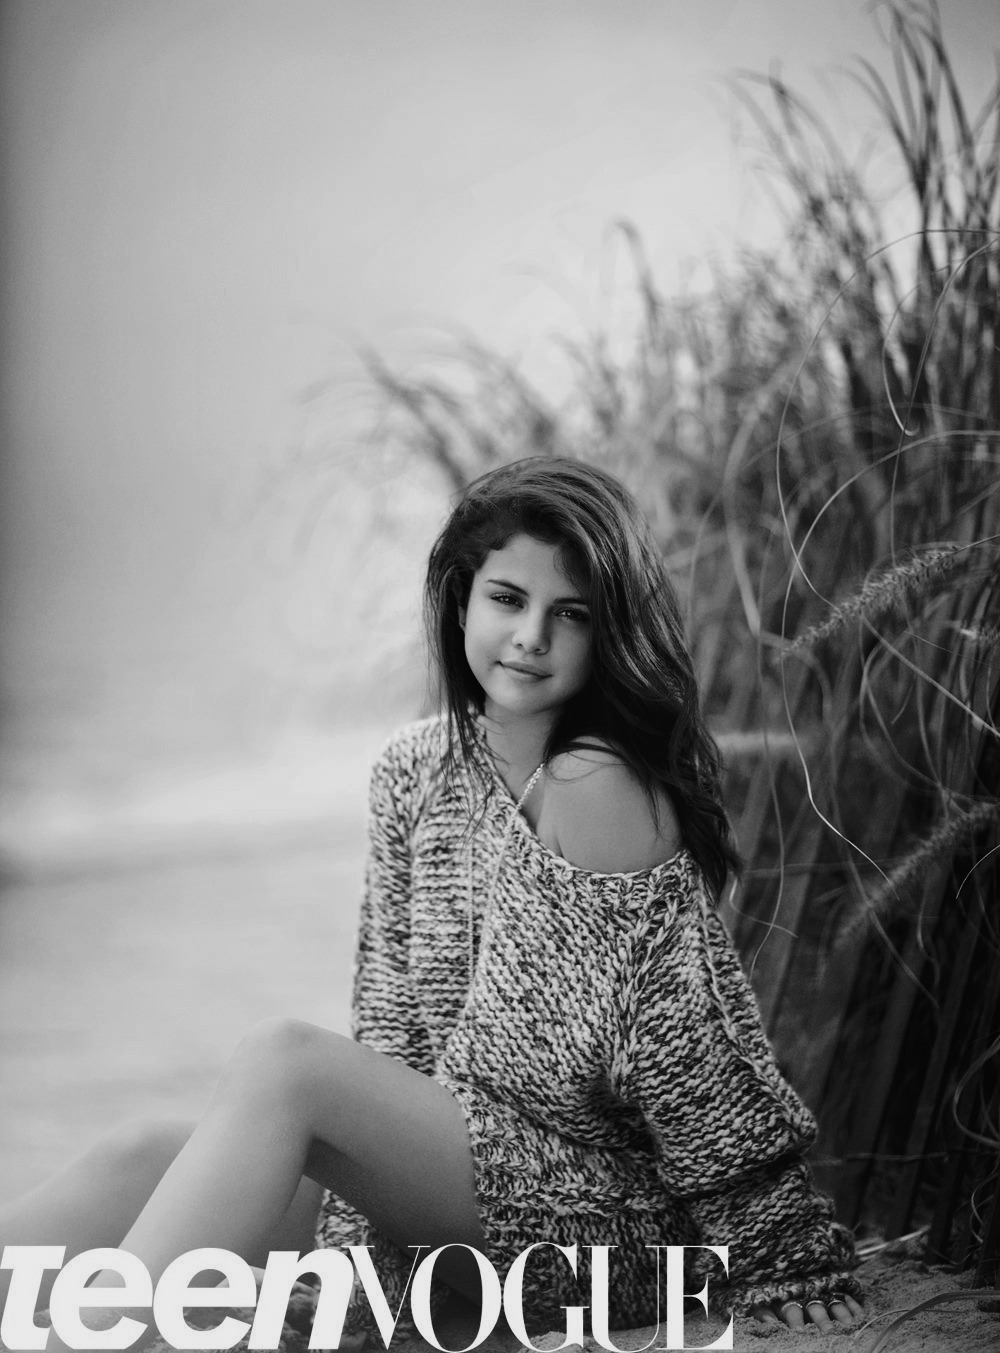 classandconfidence: Selena is a natural beauty